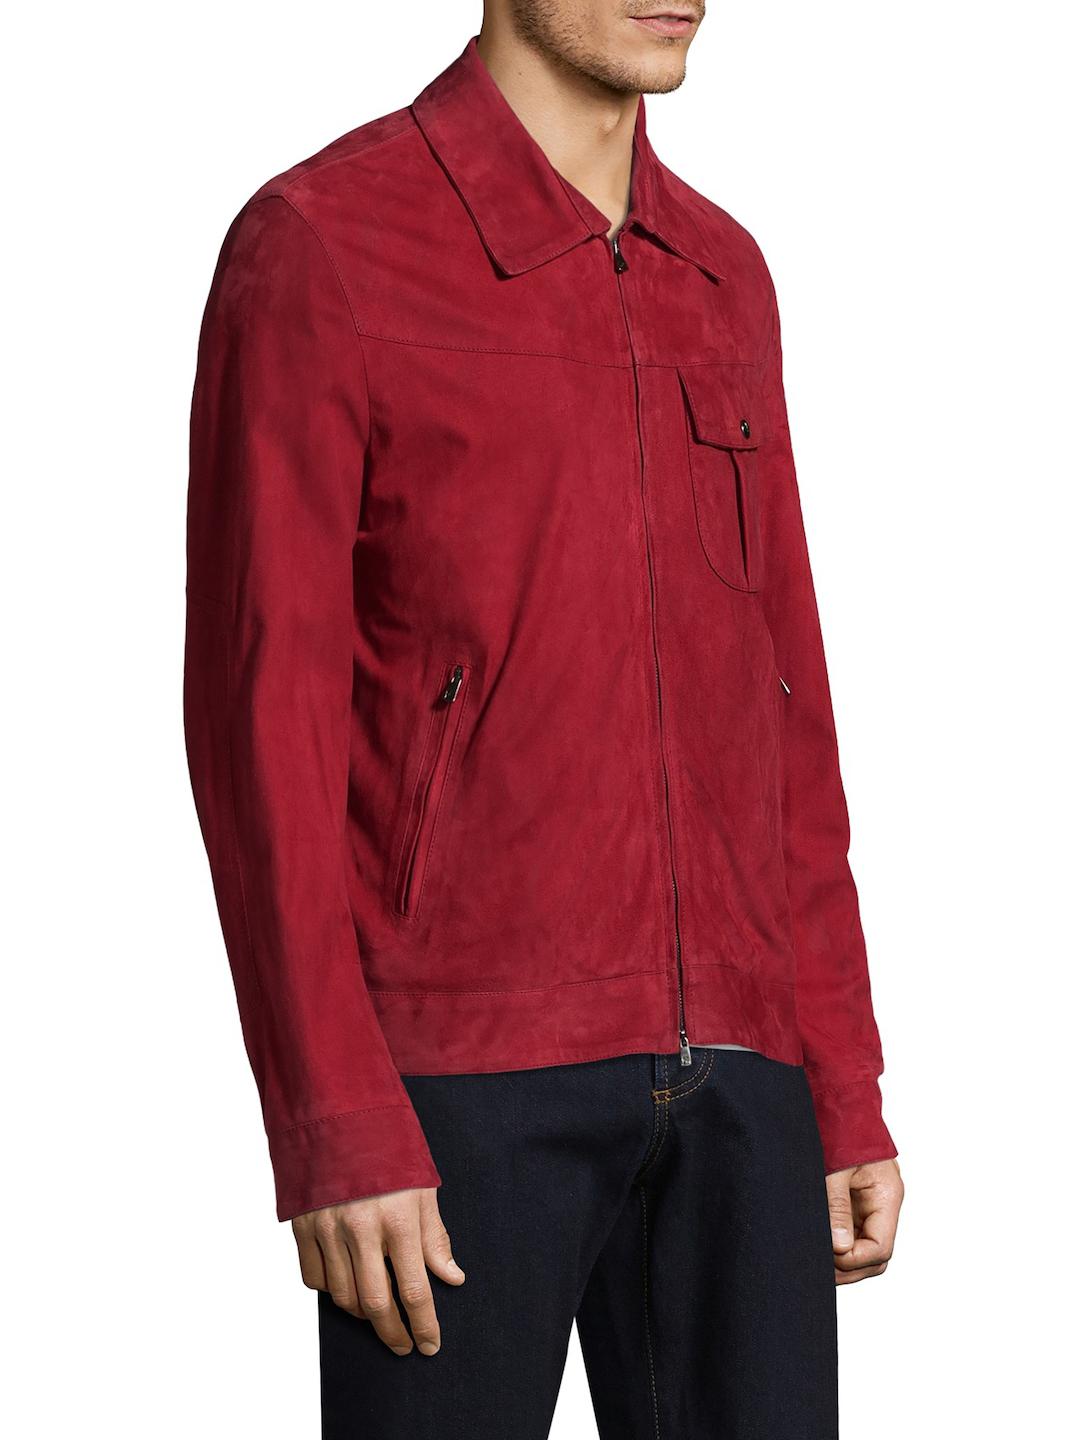 Isaia Suede Spread Collar Jacket in Red for Men - Lyst